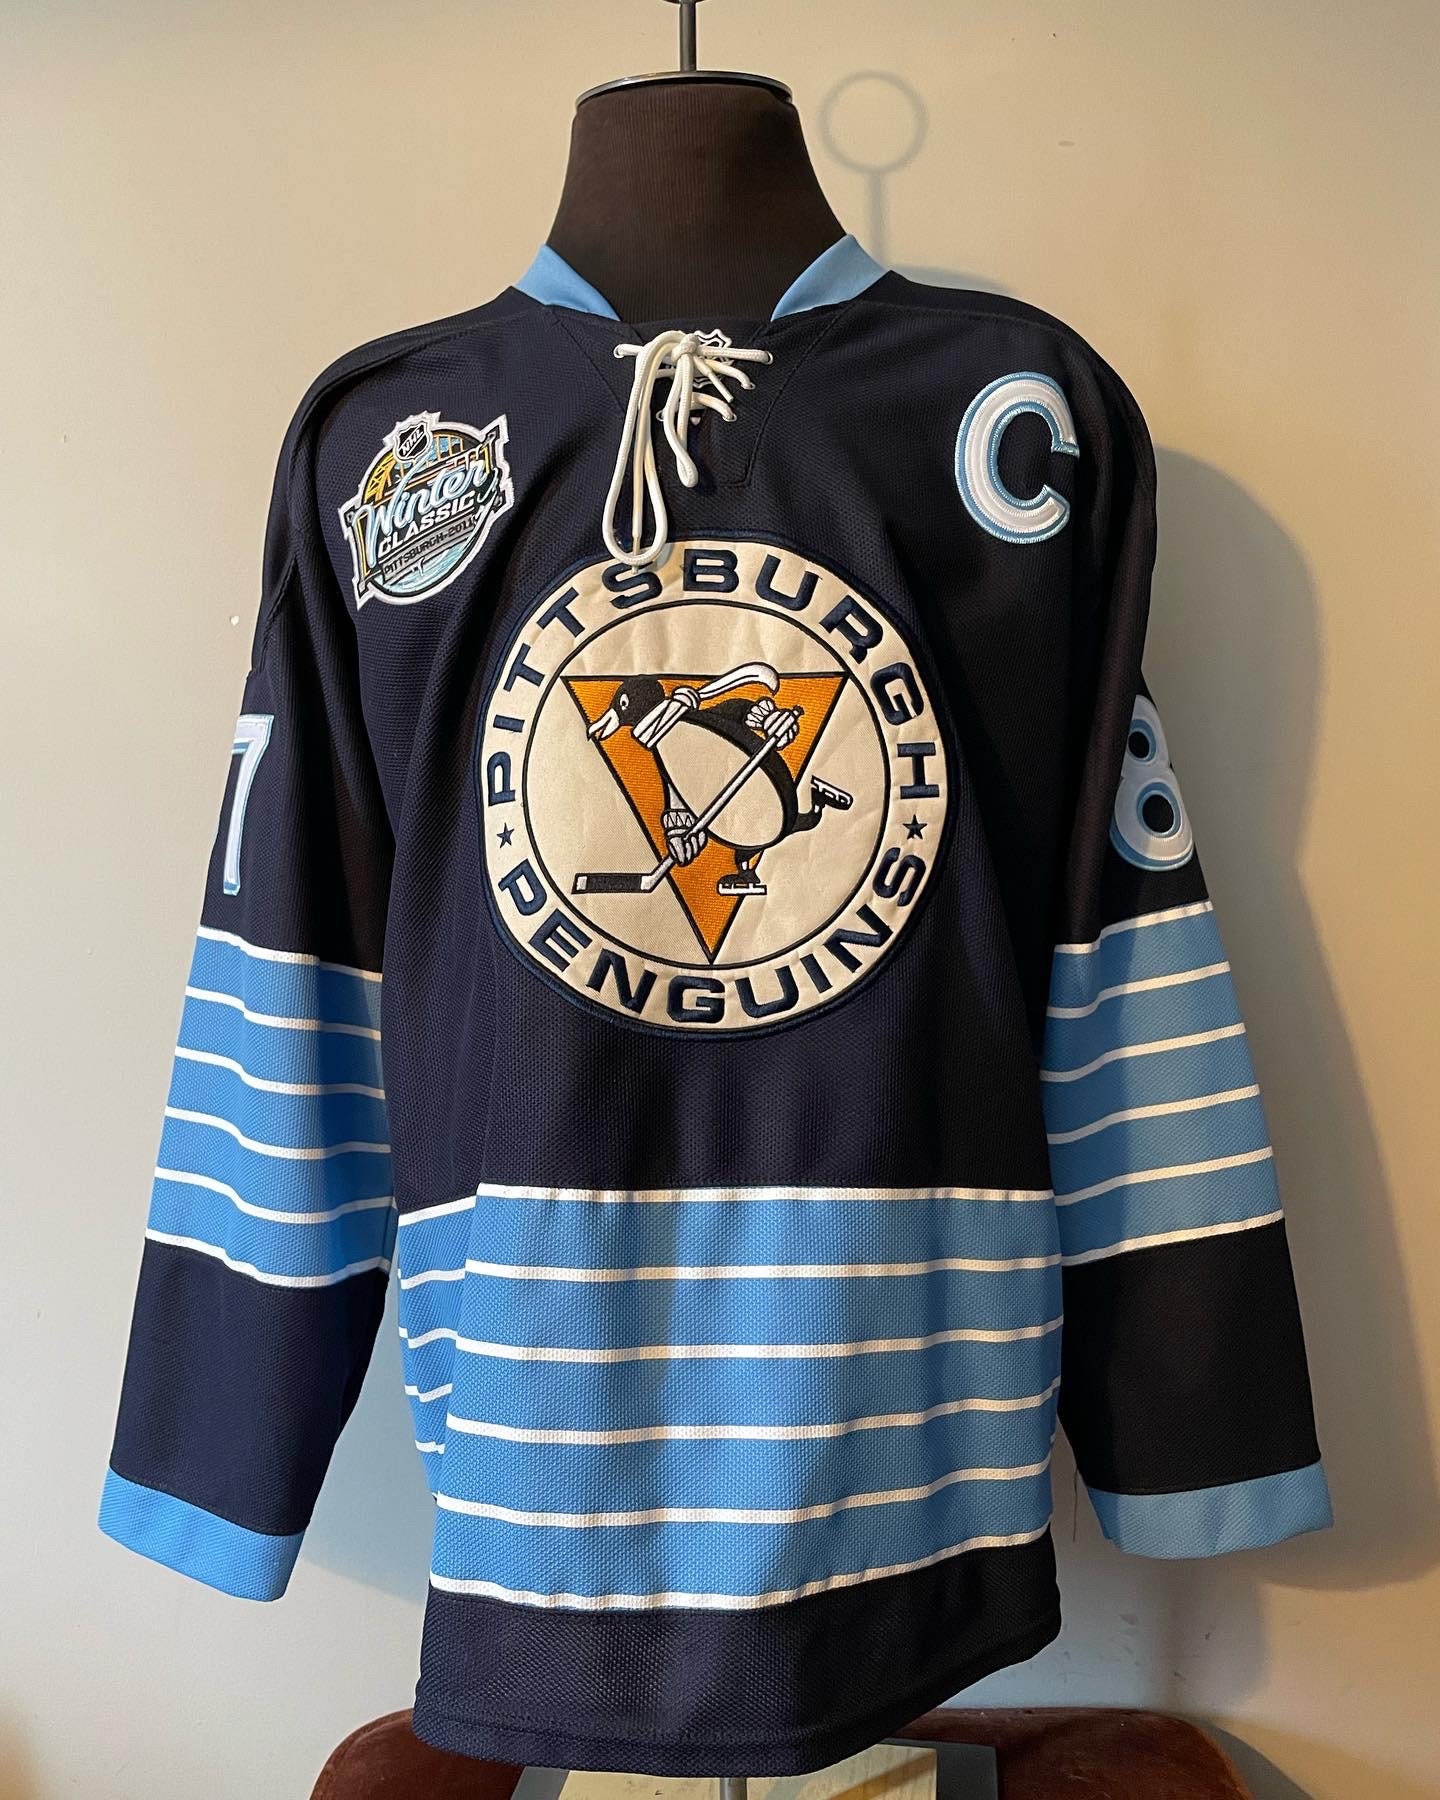 Sydney Crosby. Pittsburgh Penguins. Blue and White (Winter Classic